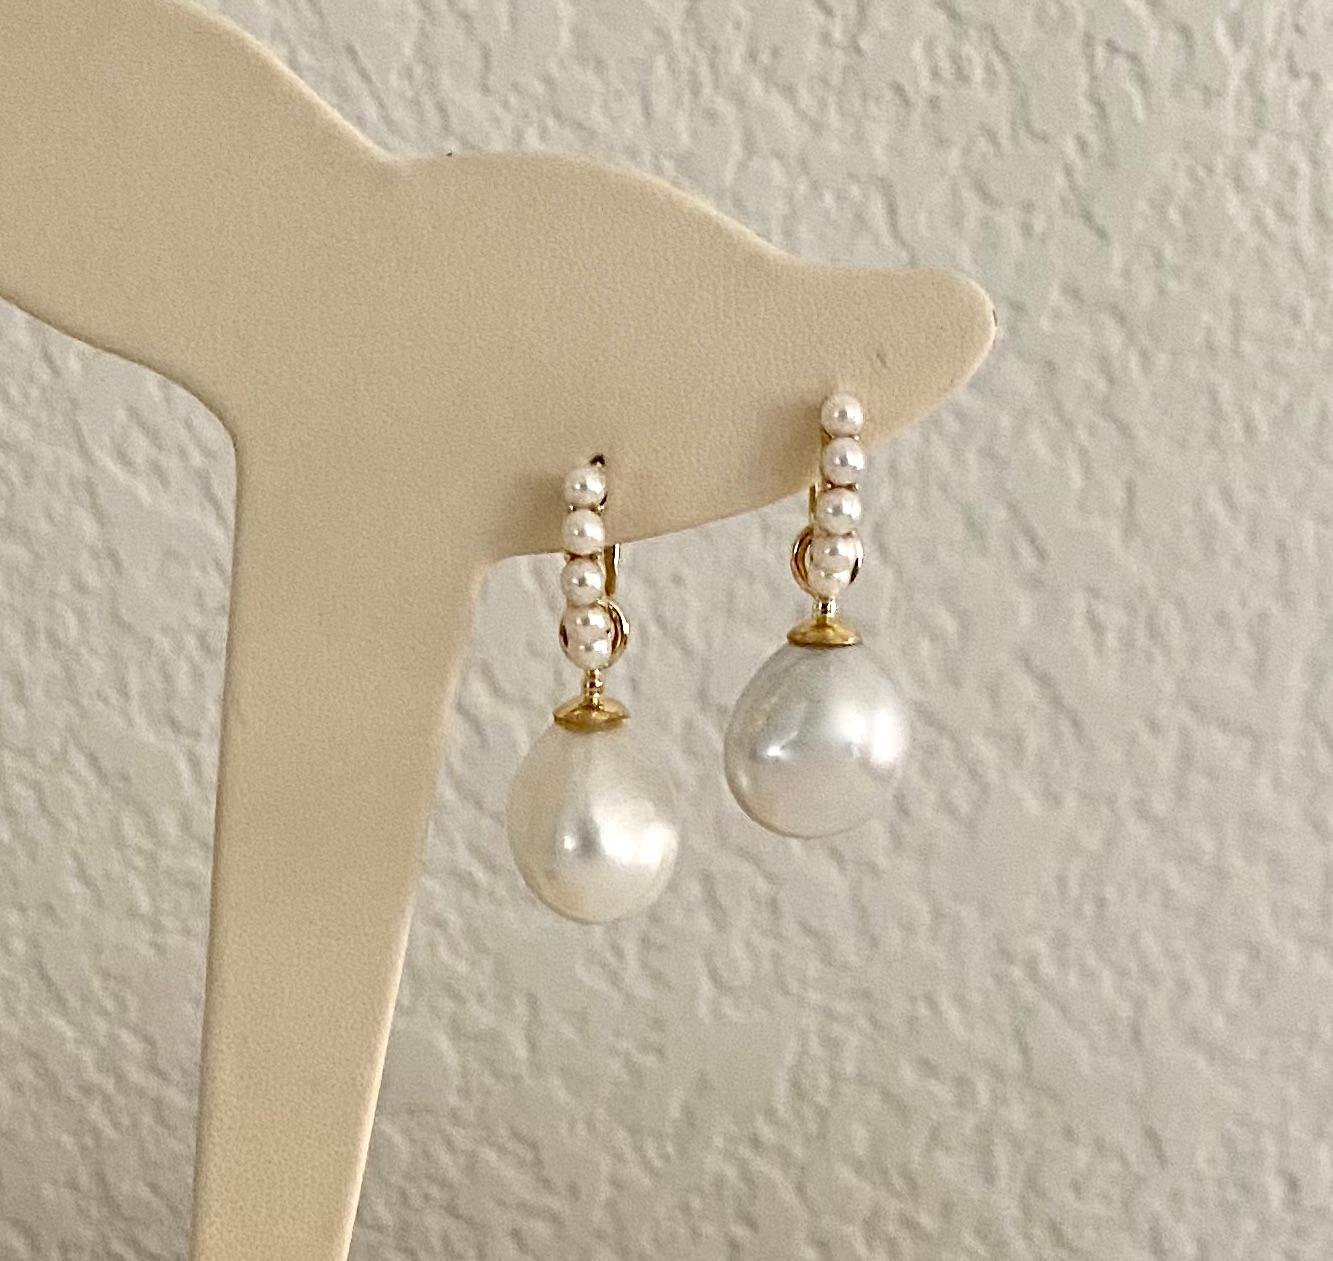 Baroque South Seas pearls dangle from these pearl 